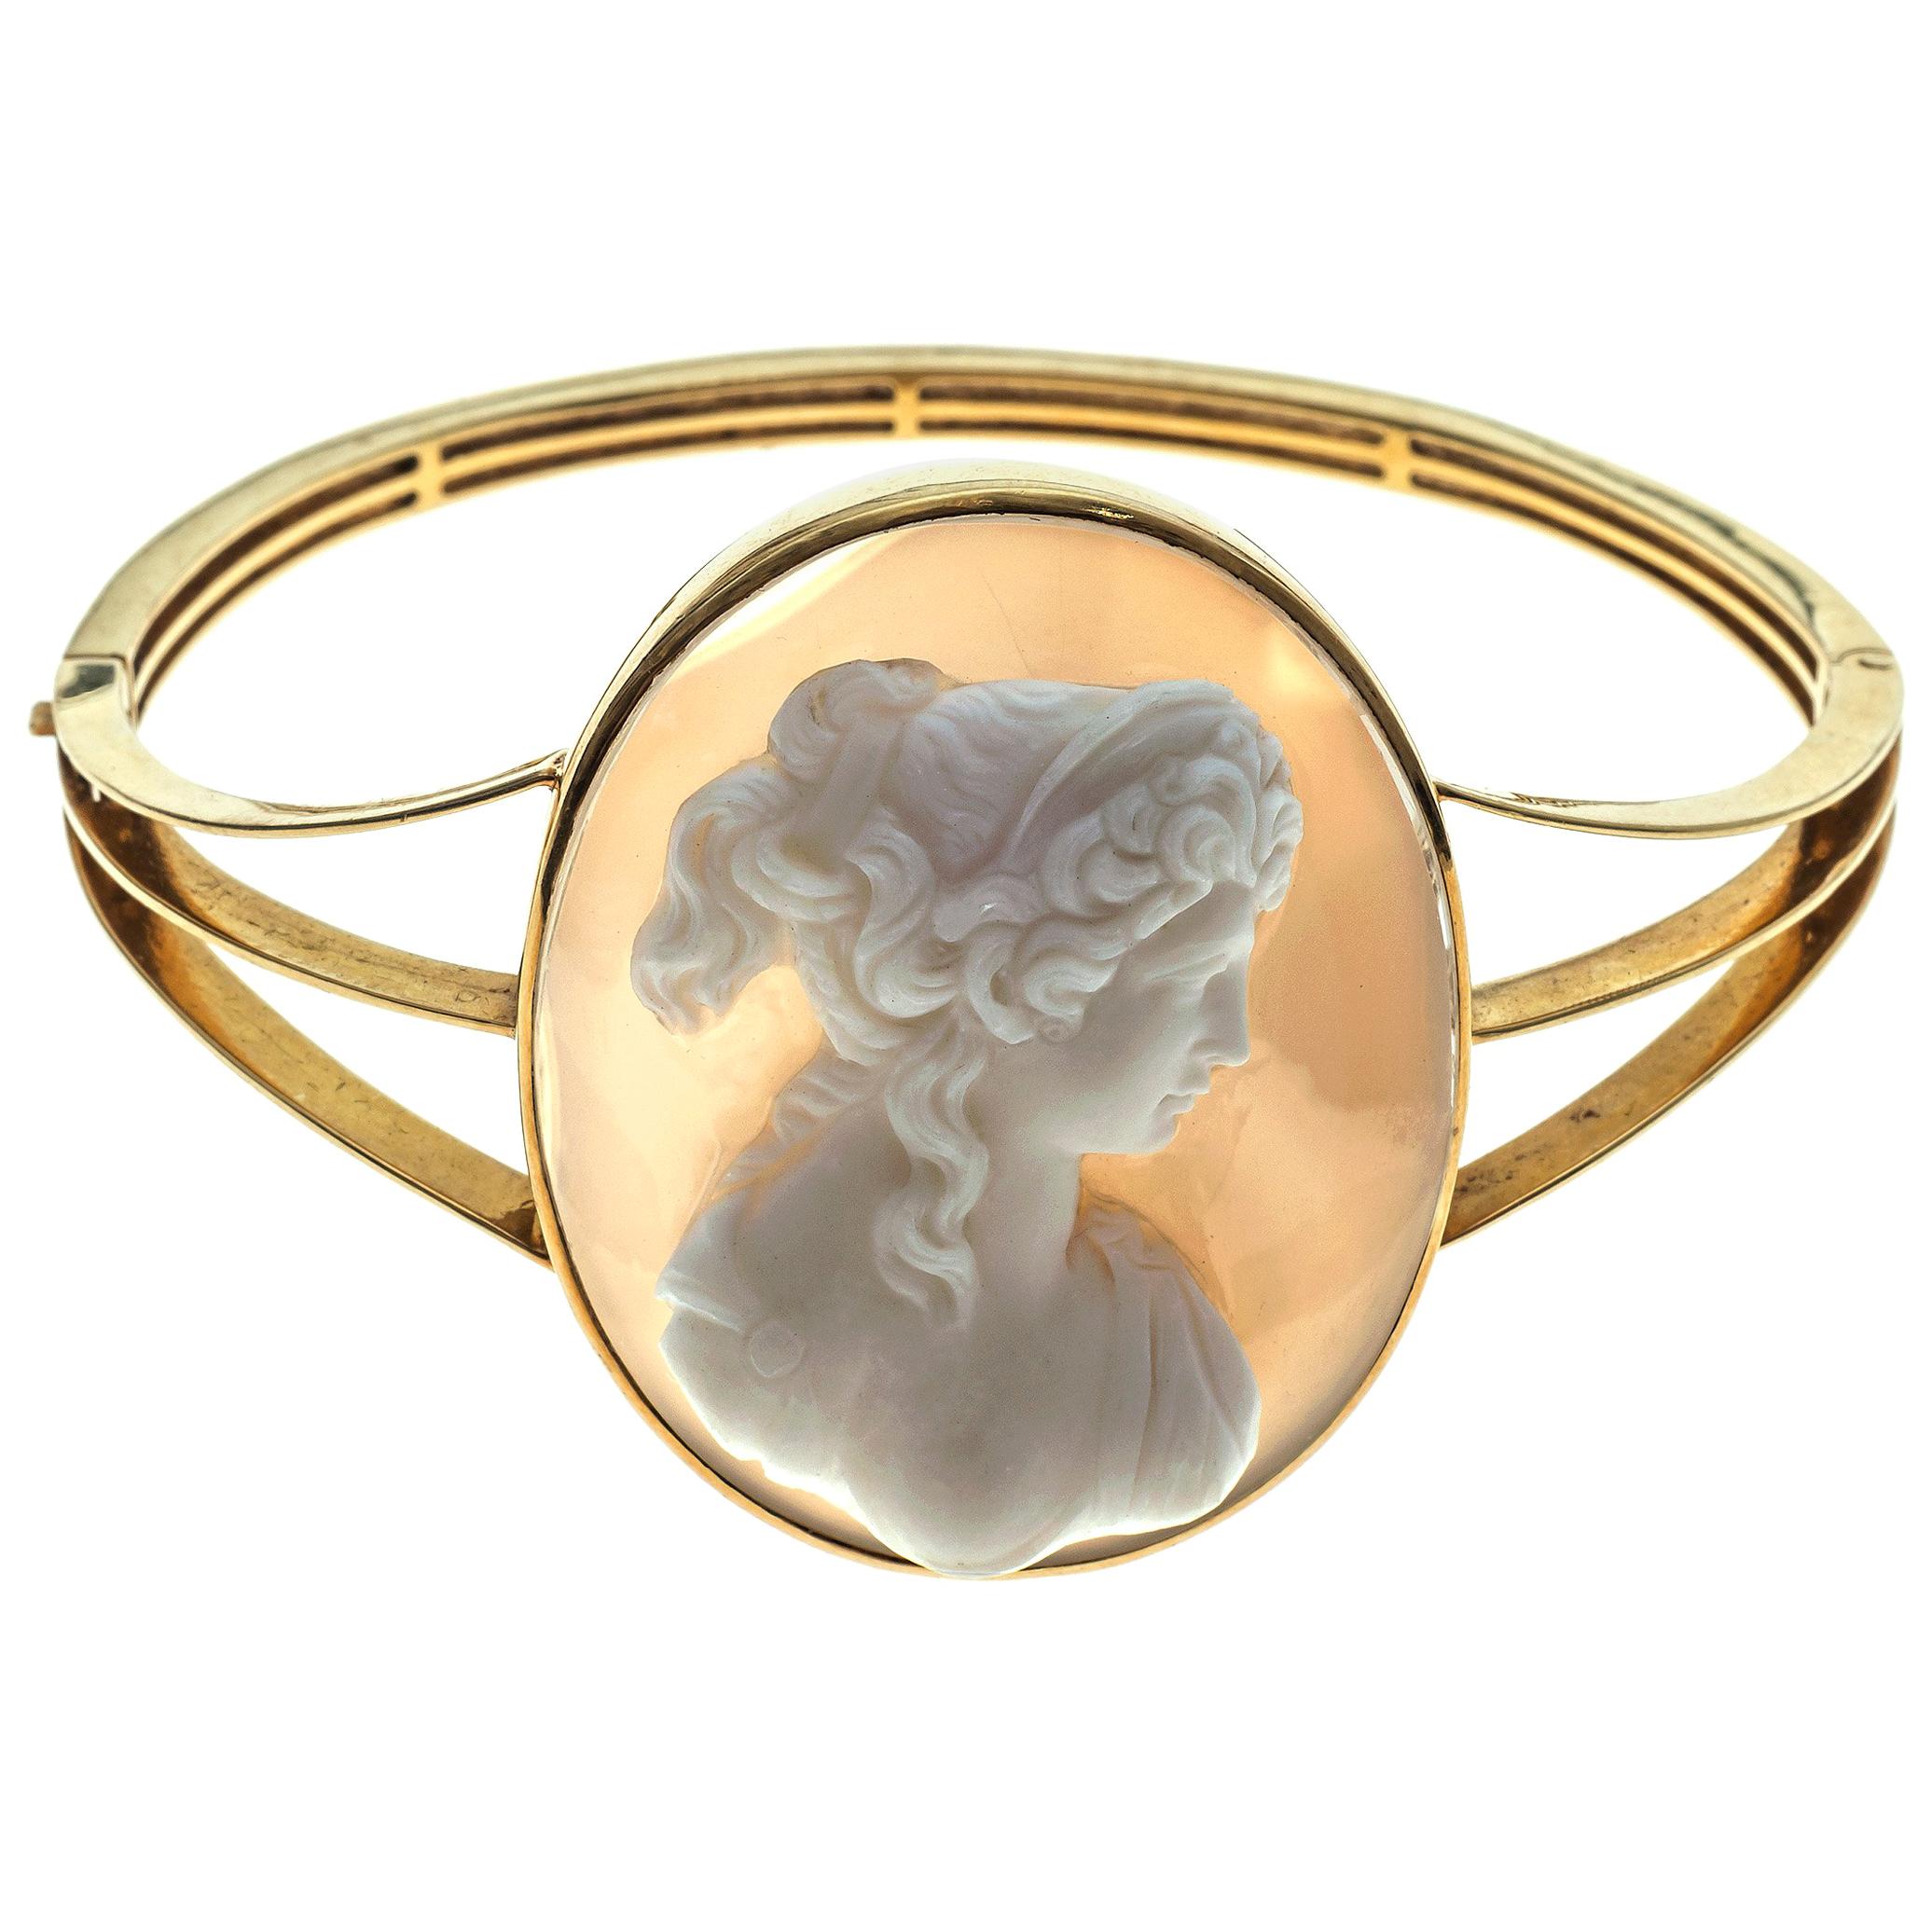 Carved agate cameo of a mythological female bust in profile. The oval sard cameo has been mounted in an 18K gold bangle in 1880's.

size bangle: 6,2 cm (W) x 4,6 cm (L)
size cameo: 4,2 cm (L) x 3,3 cm (W) the